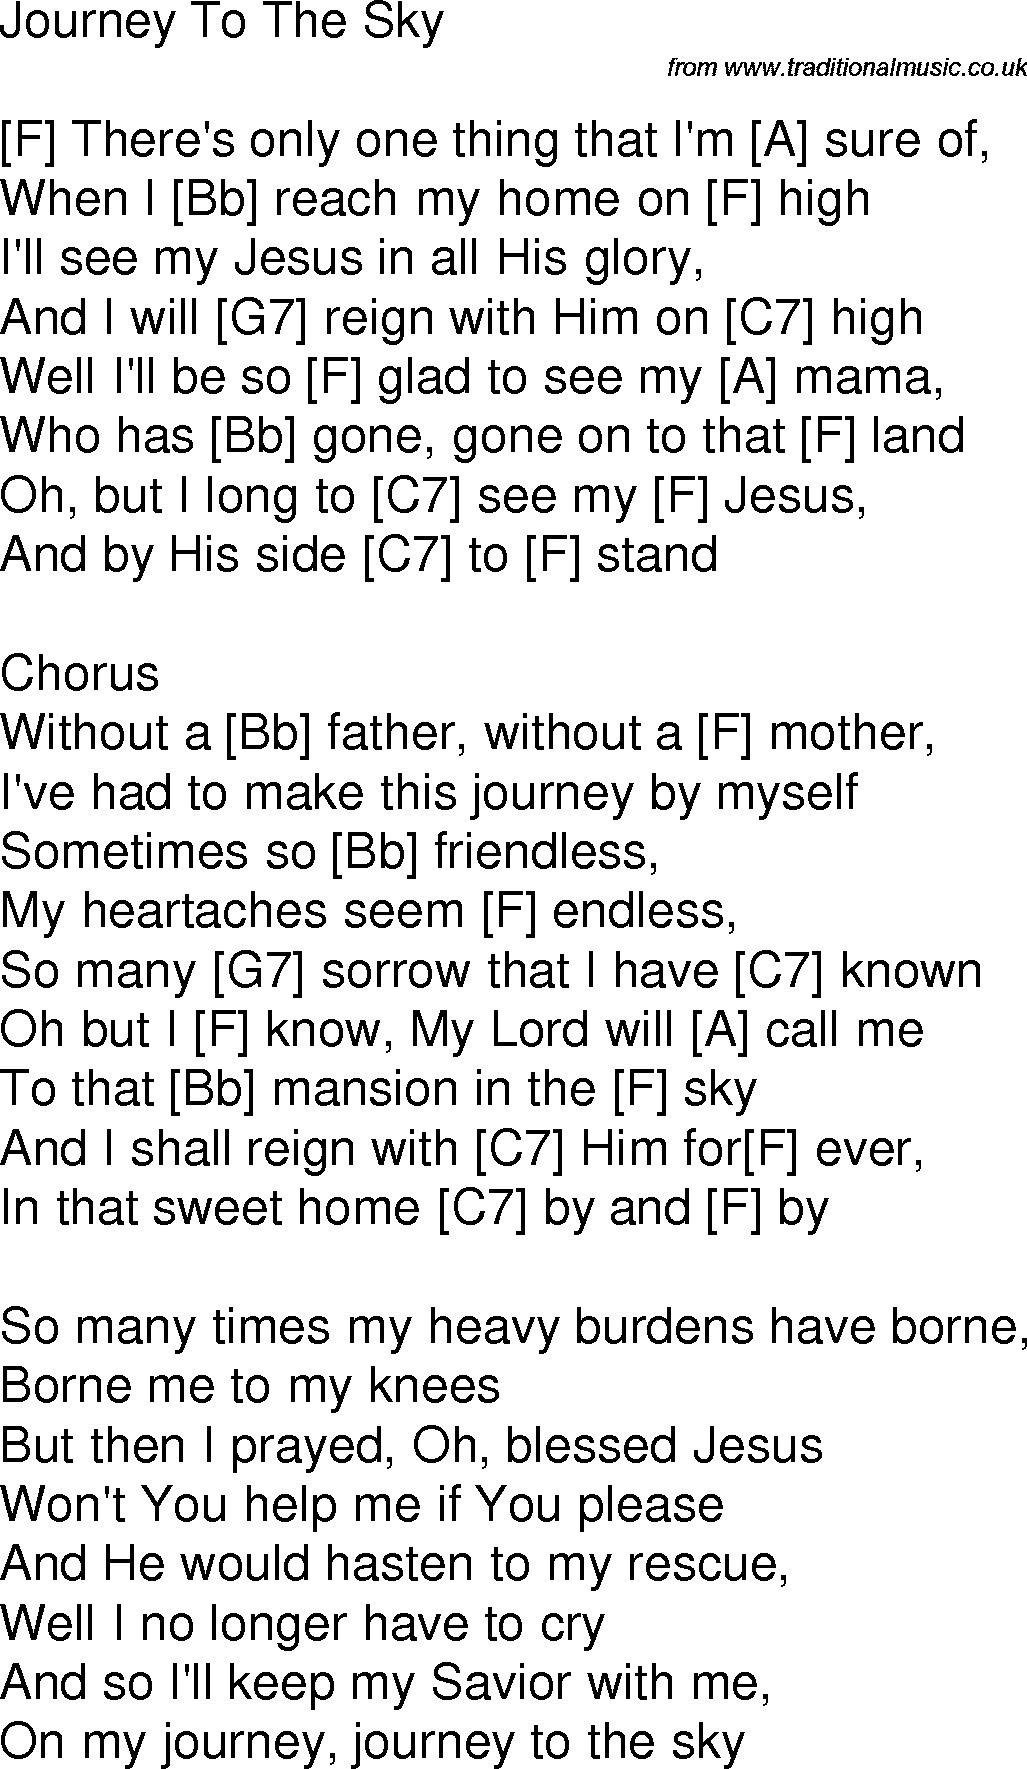 Old time song lyrics with chords for Journey To The Sky F